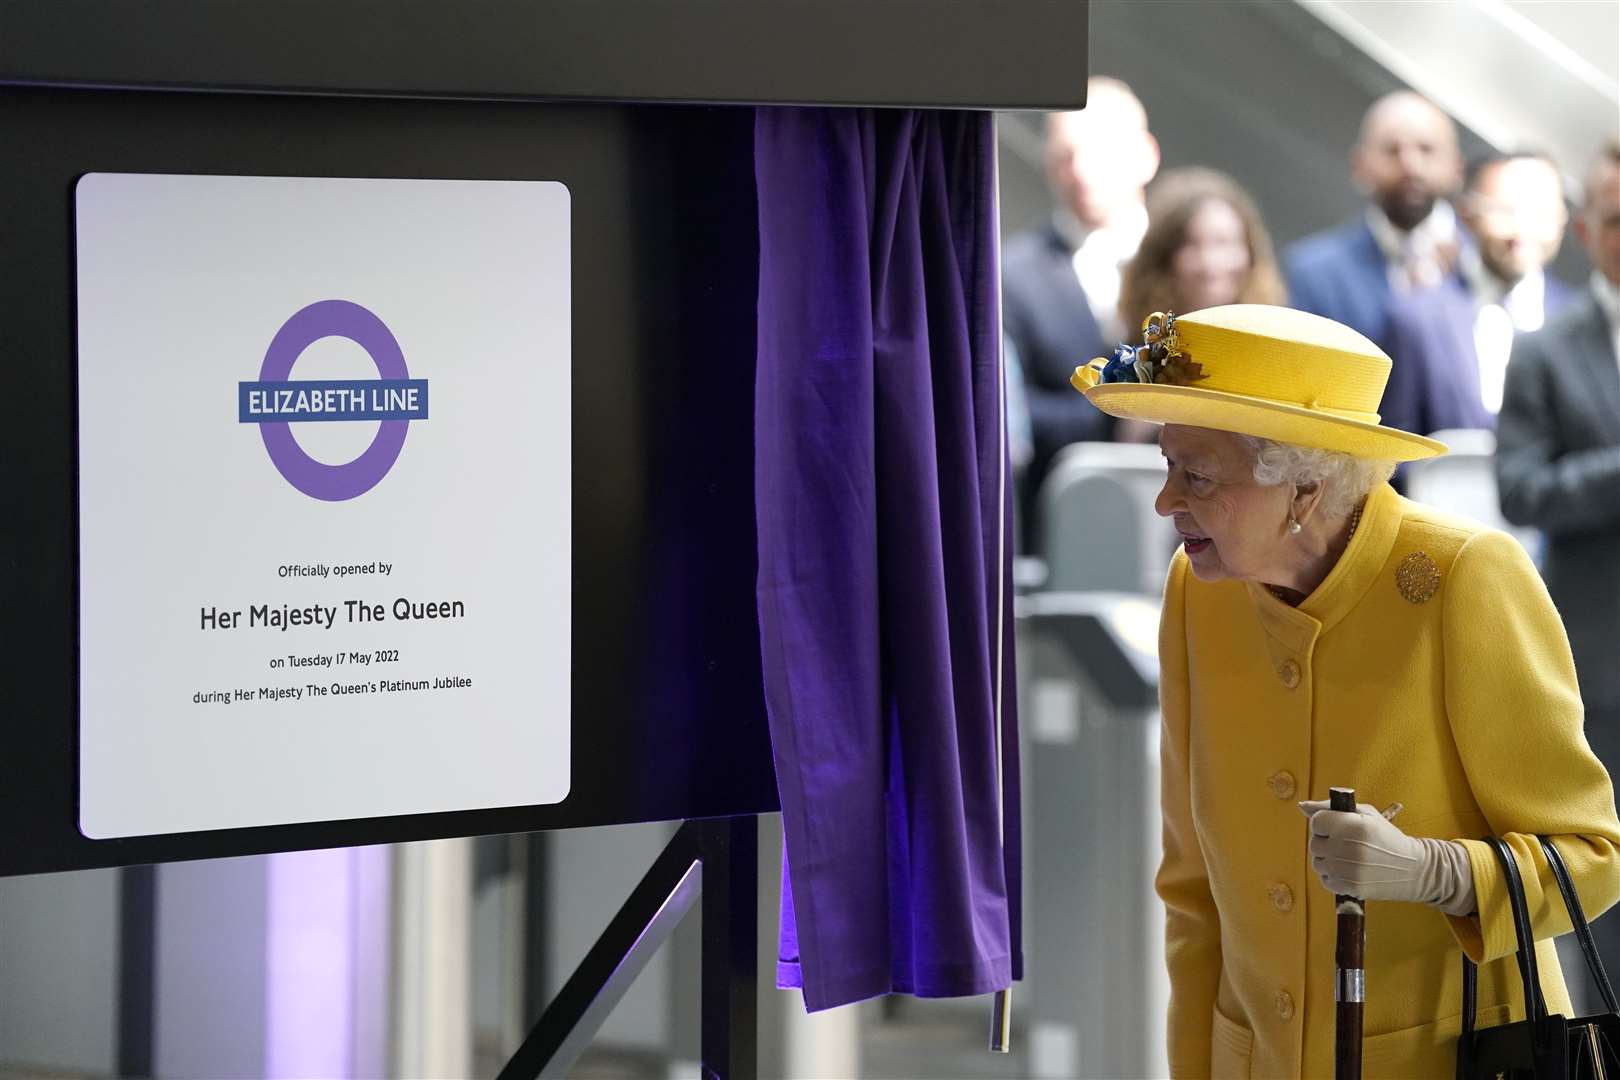 The Queen unveils a plaque to mark the Elizabeth line’s official opening at Paddington station in London in May (Andrew Matthews/PA)